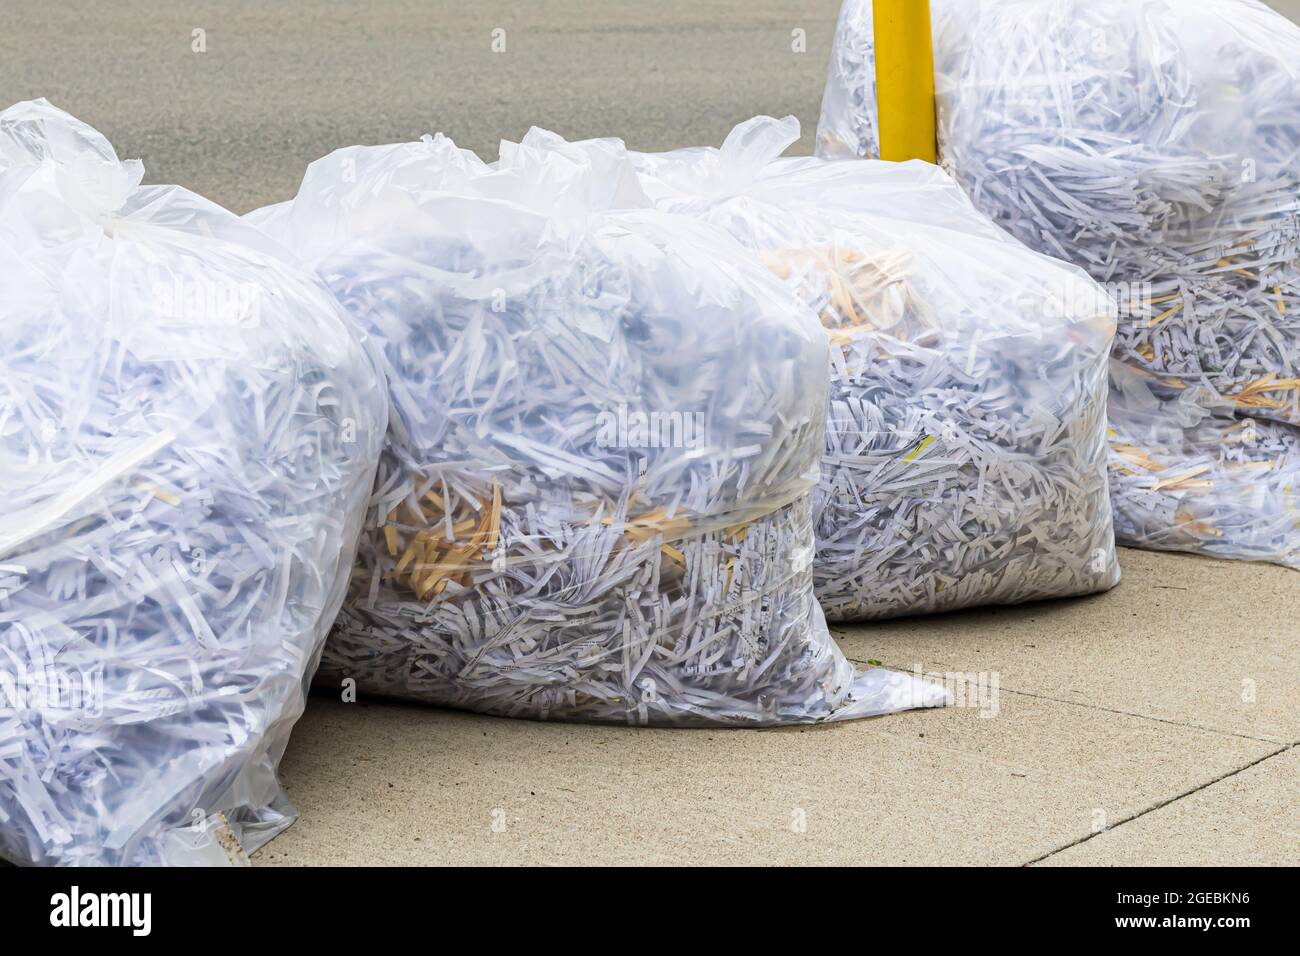 White plastic bags of shredded paper on the curb for recycling pick up Stock Photo